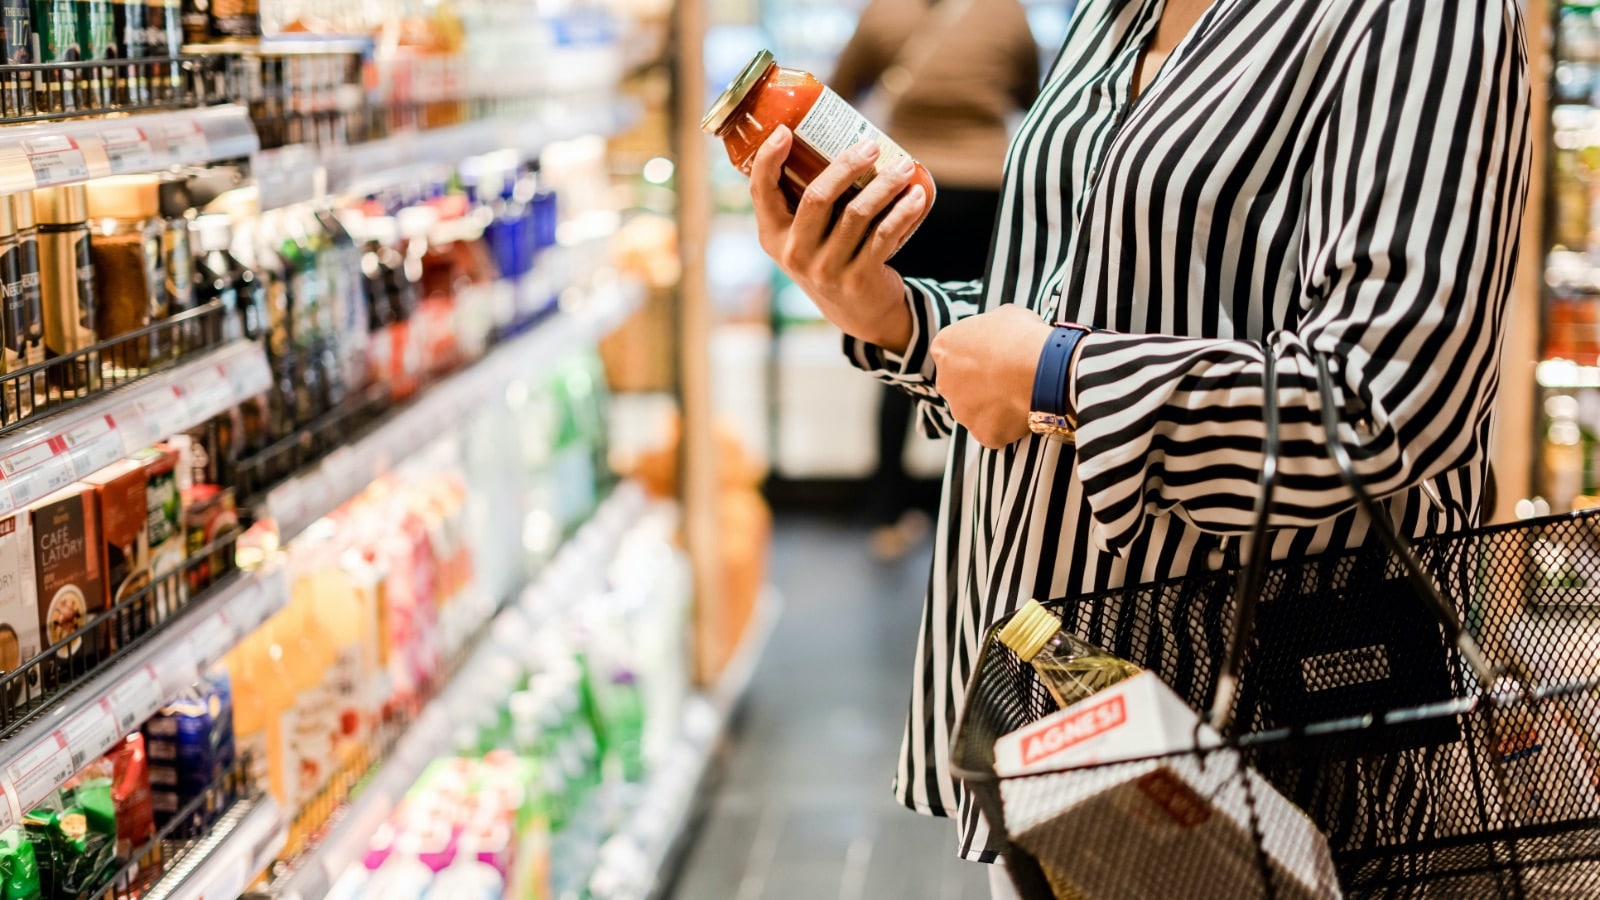 Retail And FMCG/CPG: Trends And Insights Round-up For 2021, 52% OFF